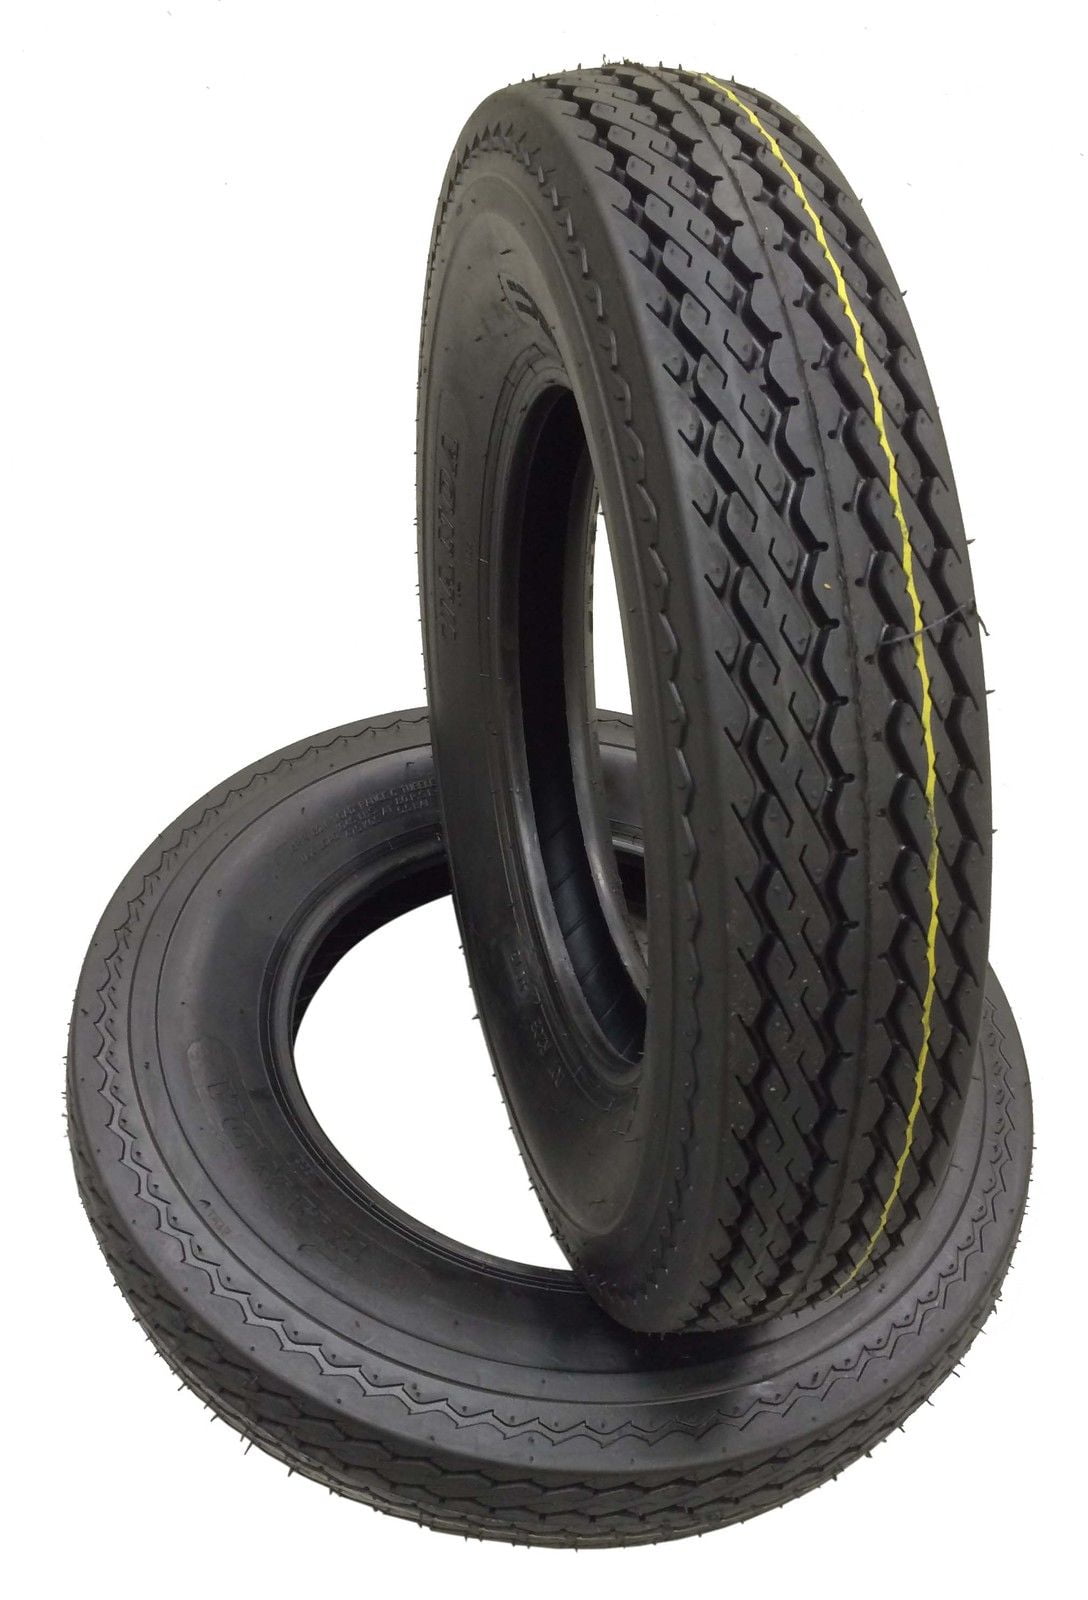 2 NEW HEAVY DUTY 4.80-8 HIGHWAY TRAILER TIRES 6 PLY LOAD RANGE C Fits Boat Motorcycle trailers 480/400-8 